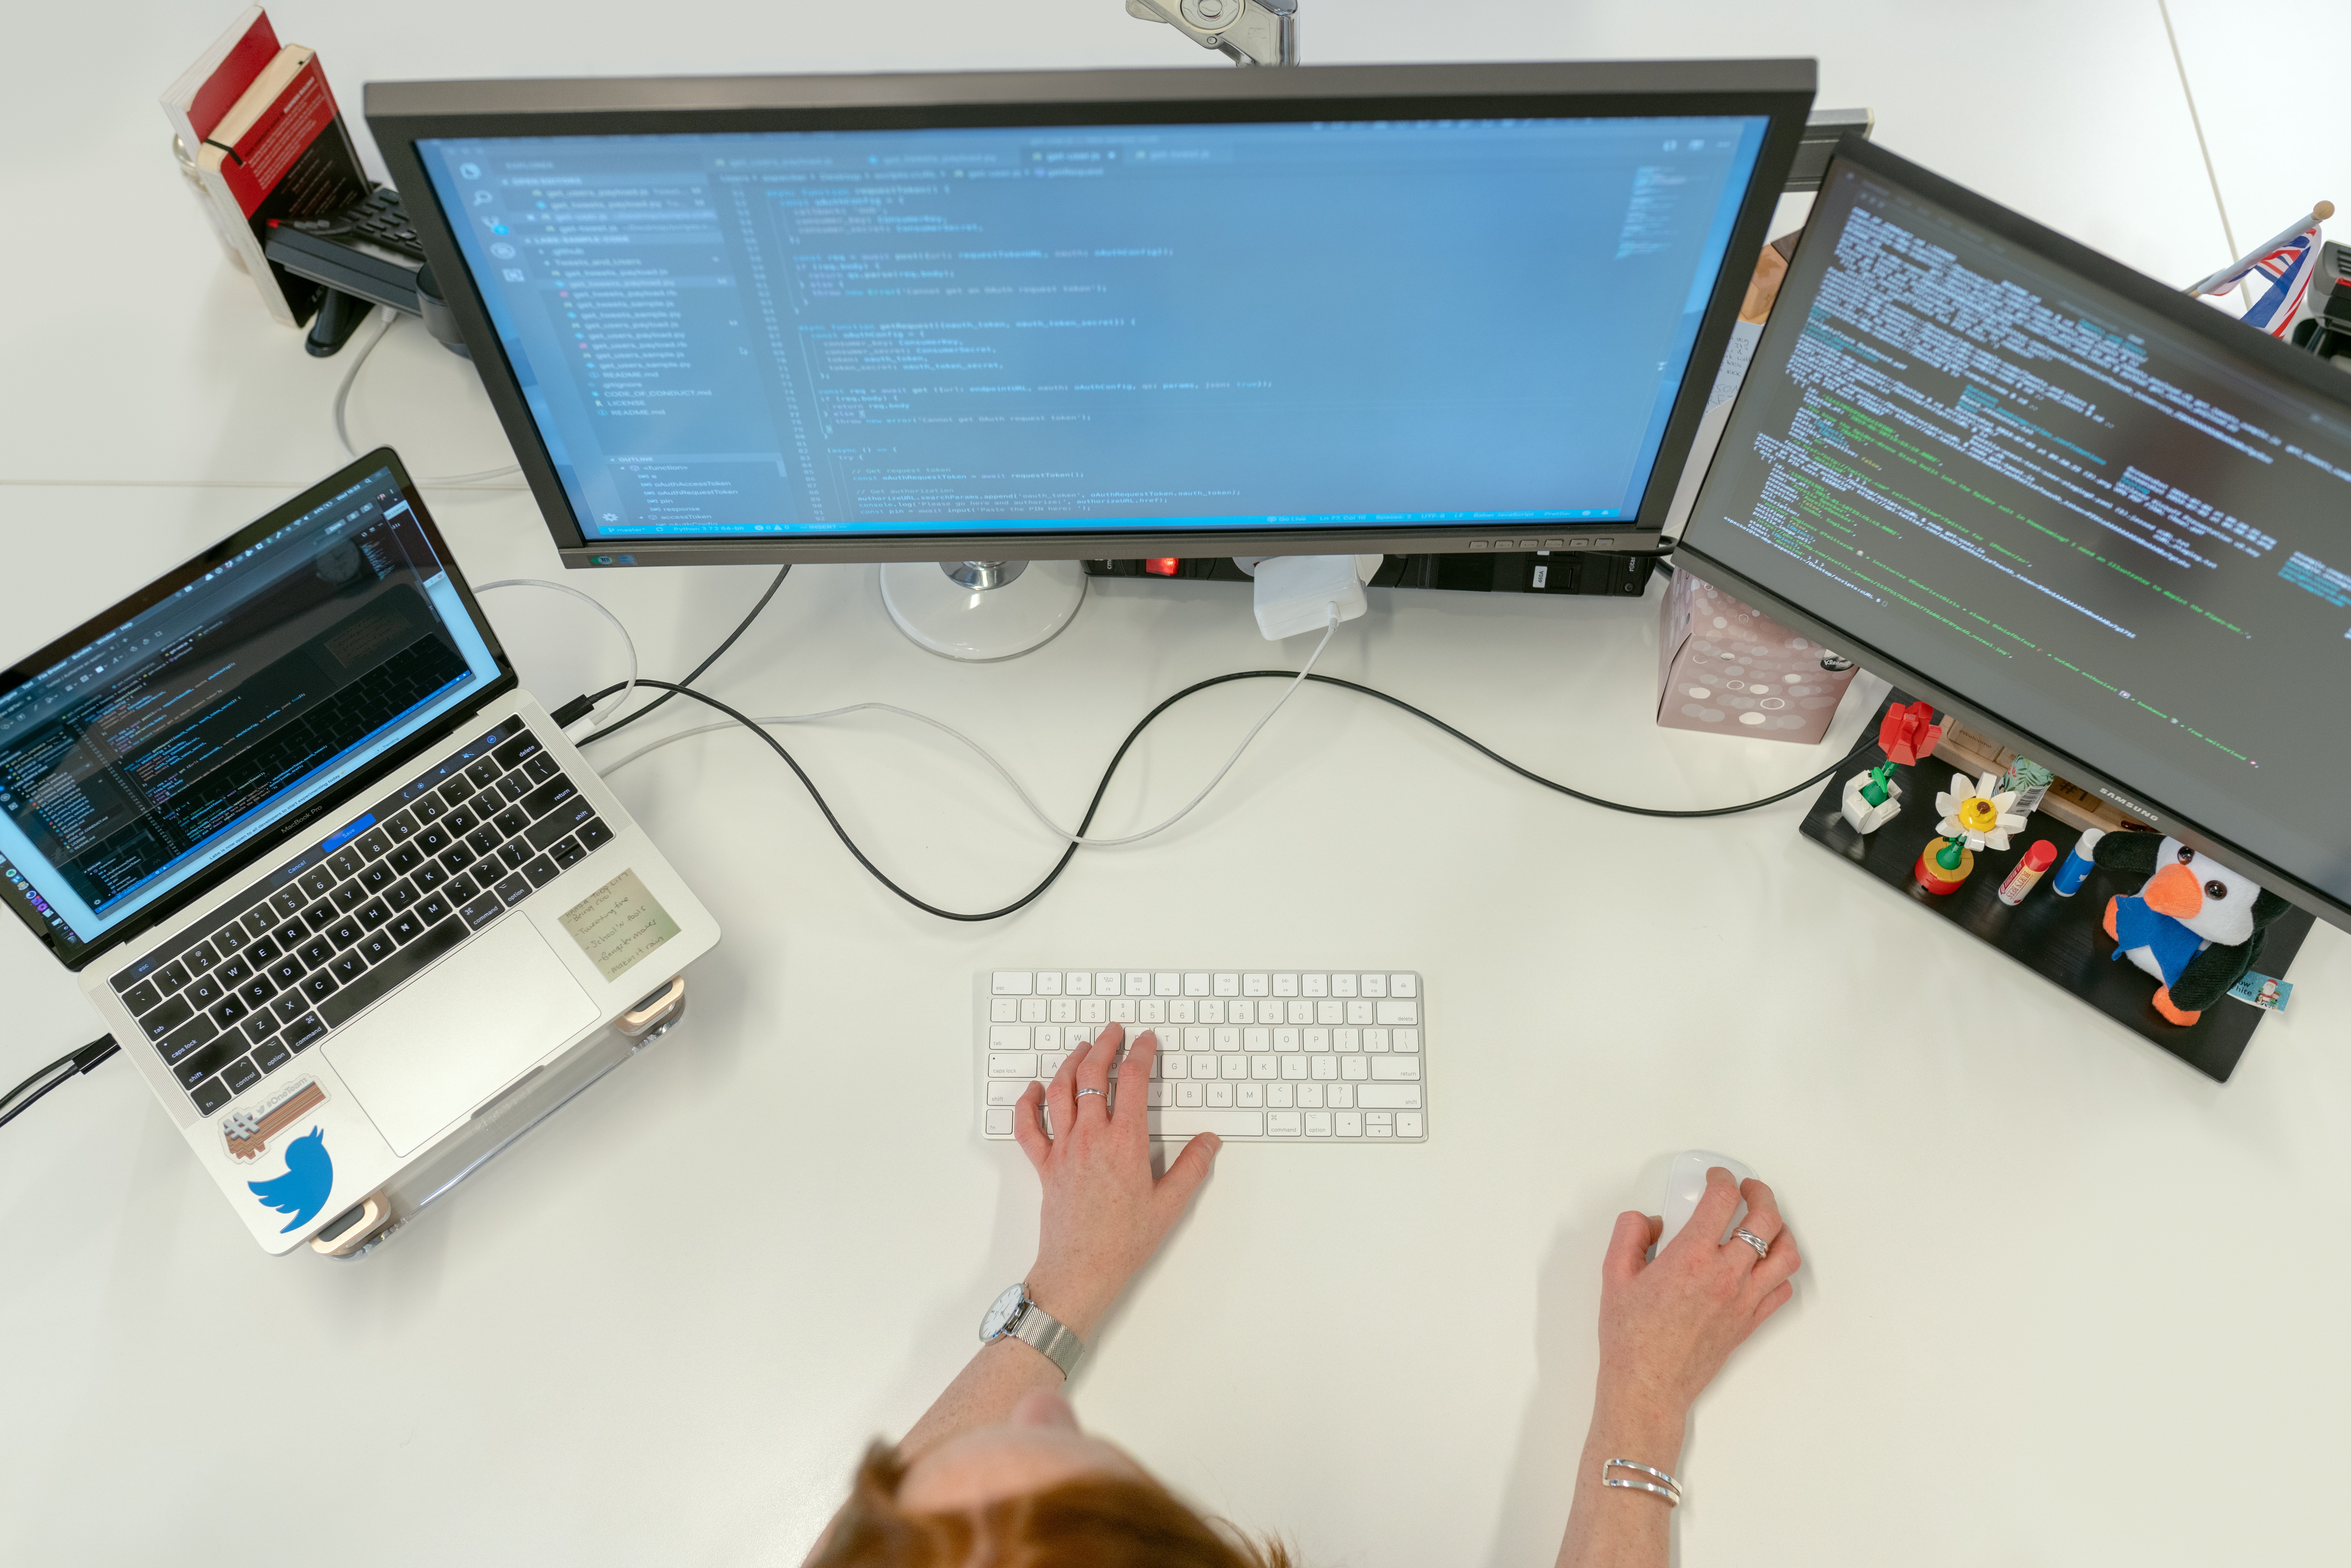 An overhead view of a software engineer's desk featuring two monitors displaying code and a laptop.